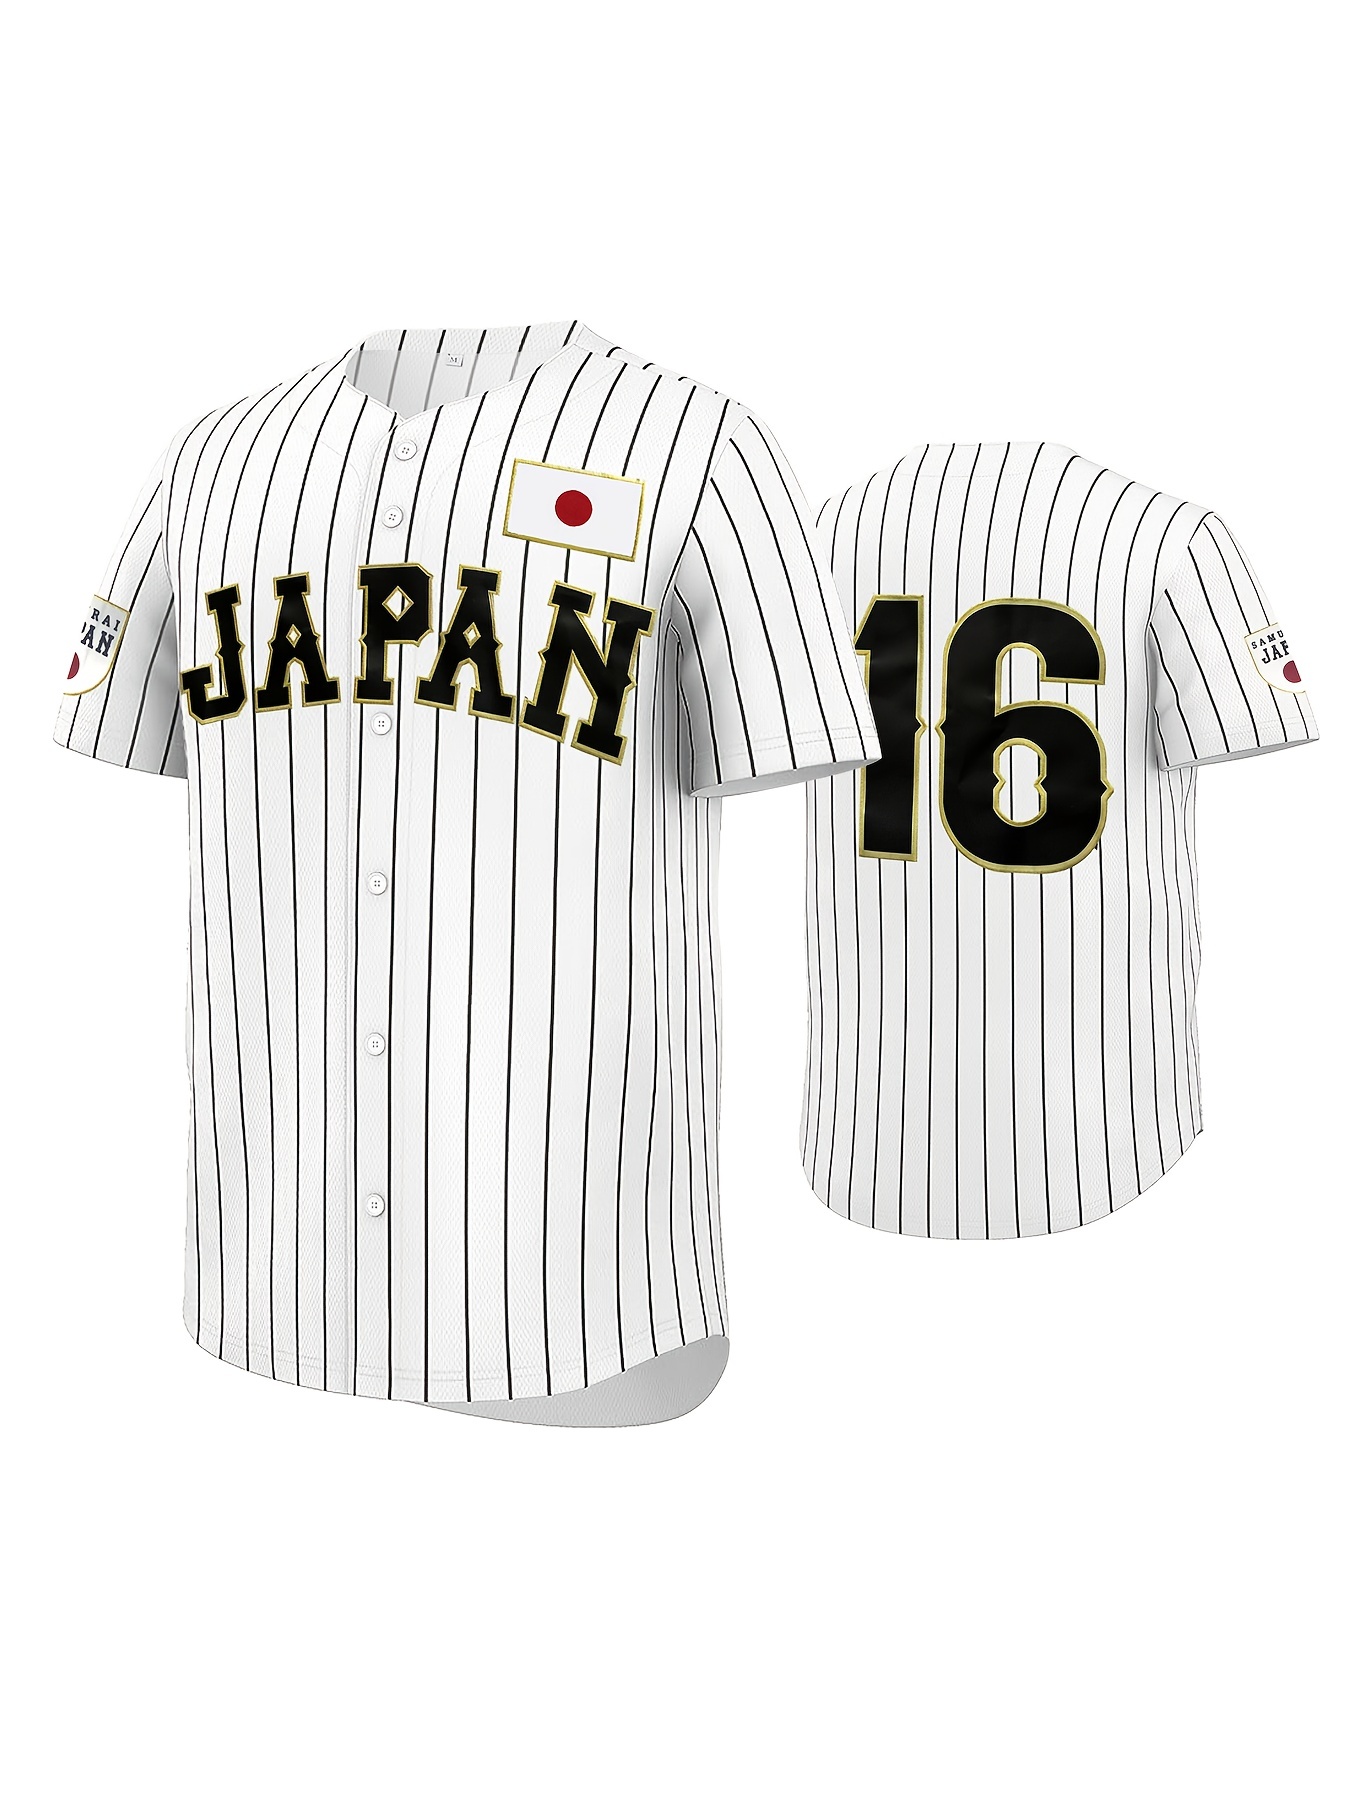 Men's Japan #16 Striped Baseball Jersey, Retro Classic Baseball Shirt, Slightly Stretch Breathable Embroidery Button Up Sports Uniform for Training